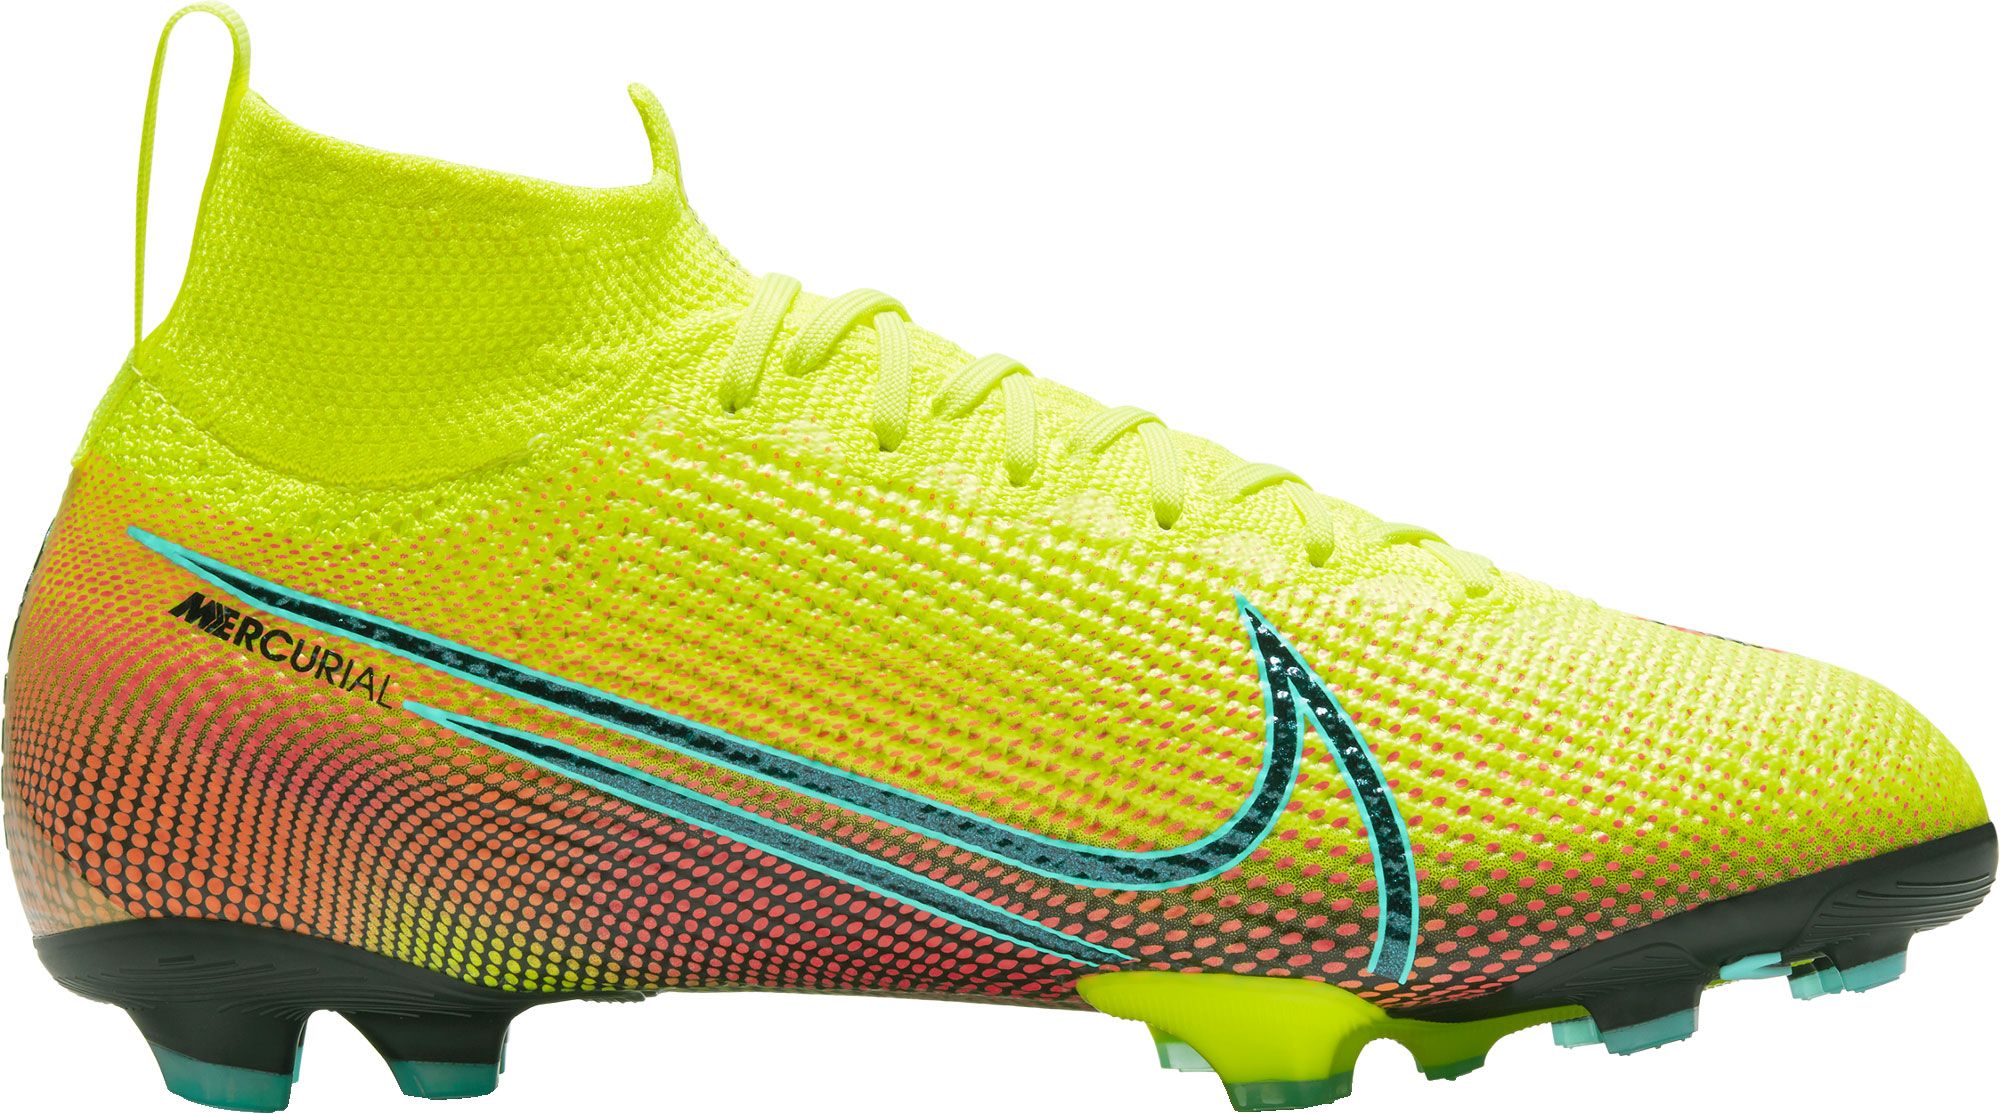 Welcome To The Official Nike Mercurial Superfly VI Elite TF.